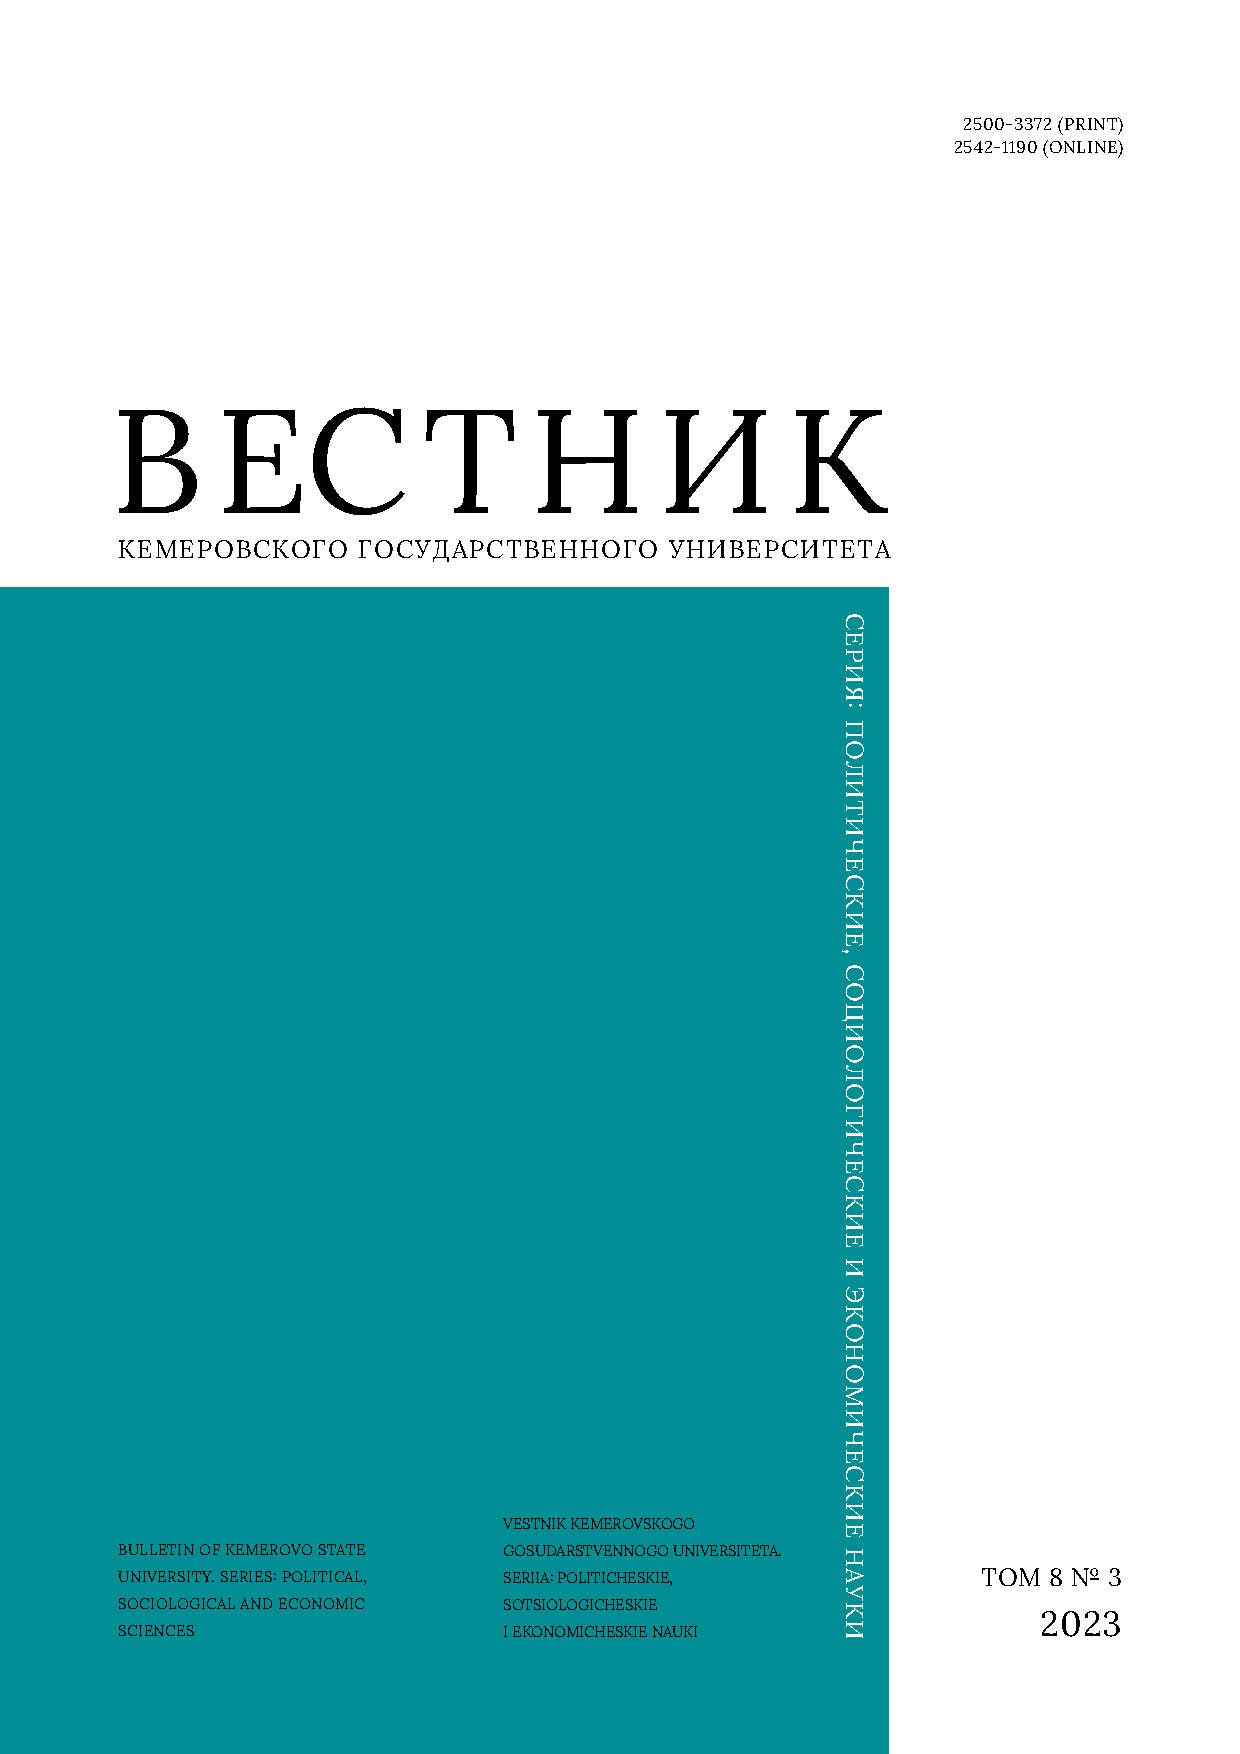                         Legal and Institutional Framework of Youth Spiritual  and Moral Upbringing in the Context of Voluntary Work Development in Modern Russia
            